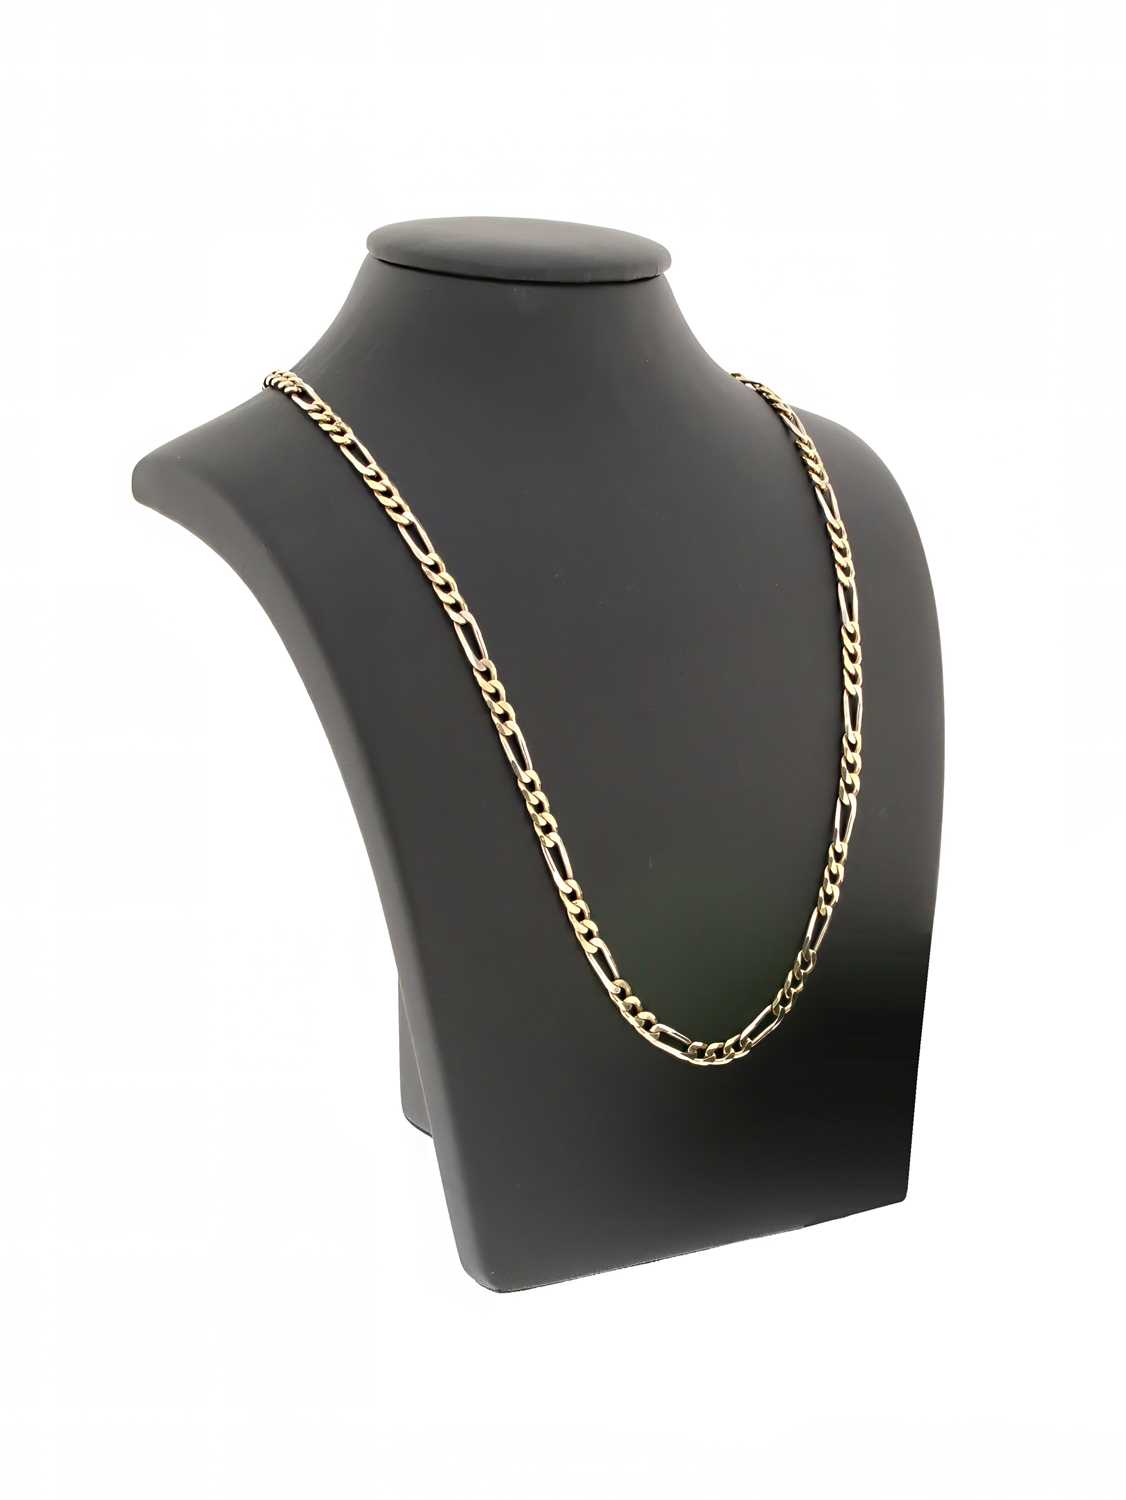 Lot 543 - 14K Gold Figaro Chain Necklace